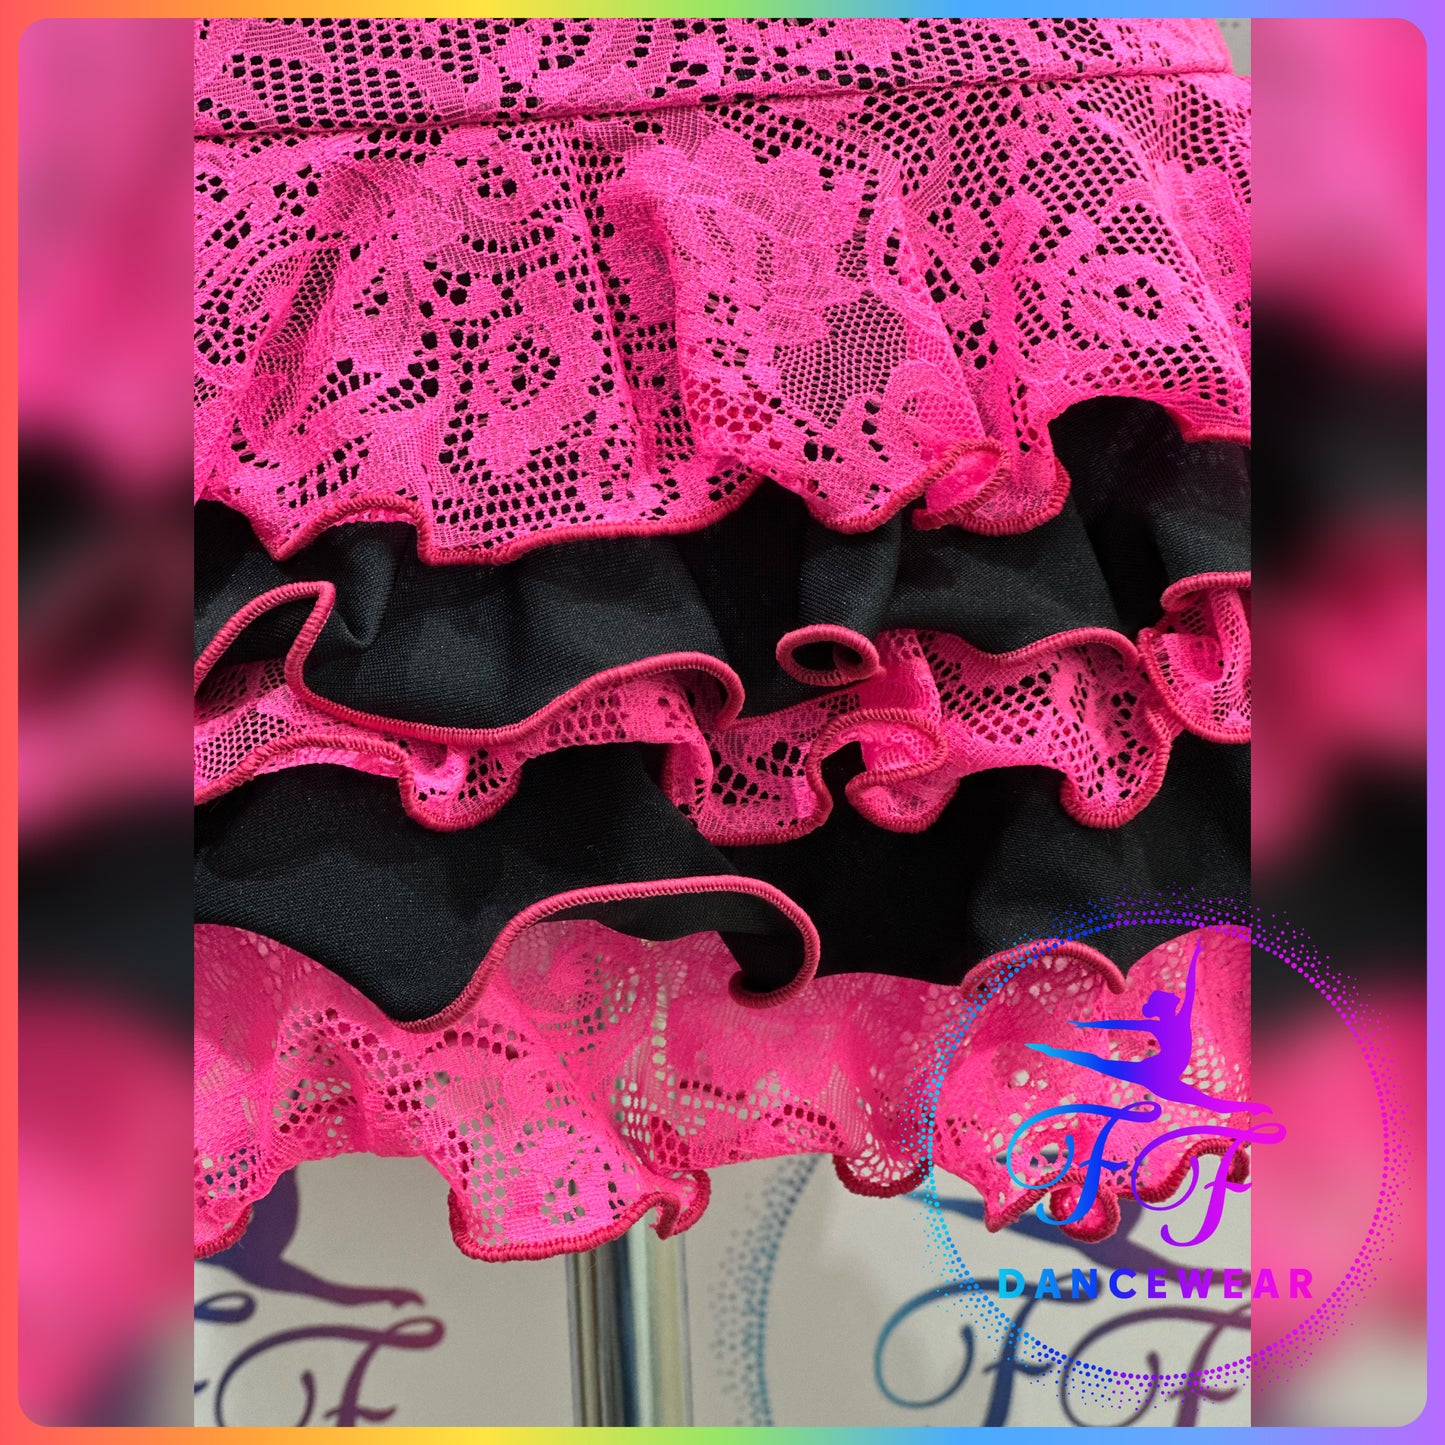 Neon Pink Lace & Black Modern / Tap / Jazz Dance Costume (Size 1 - 7/8 yrs approx)